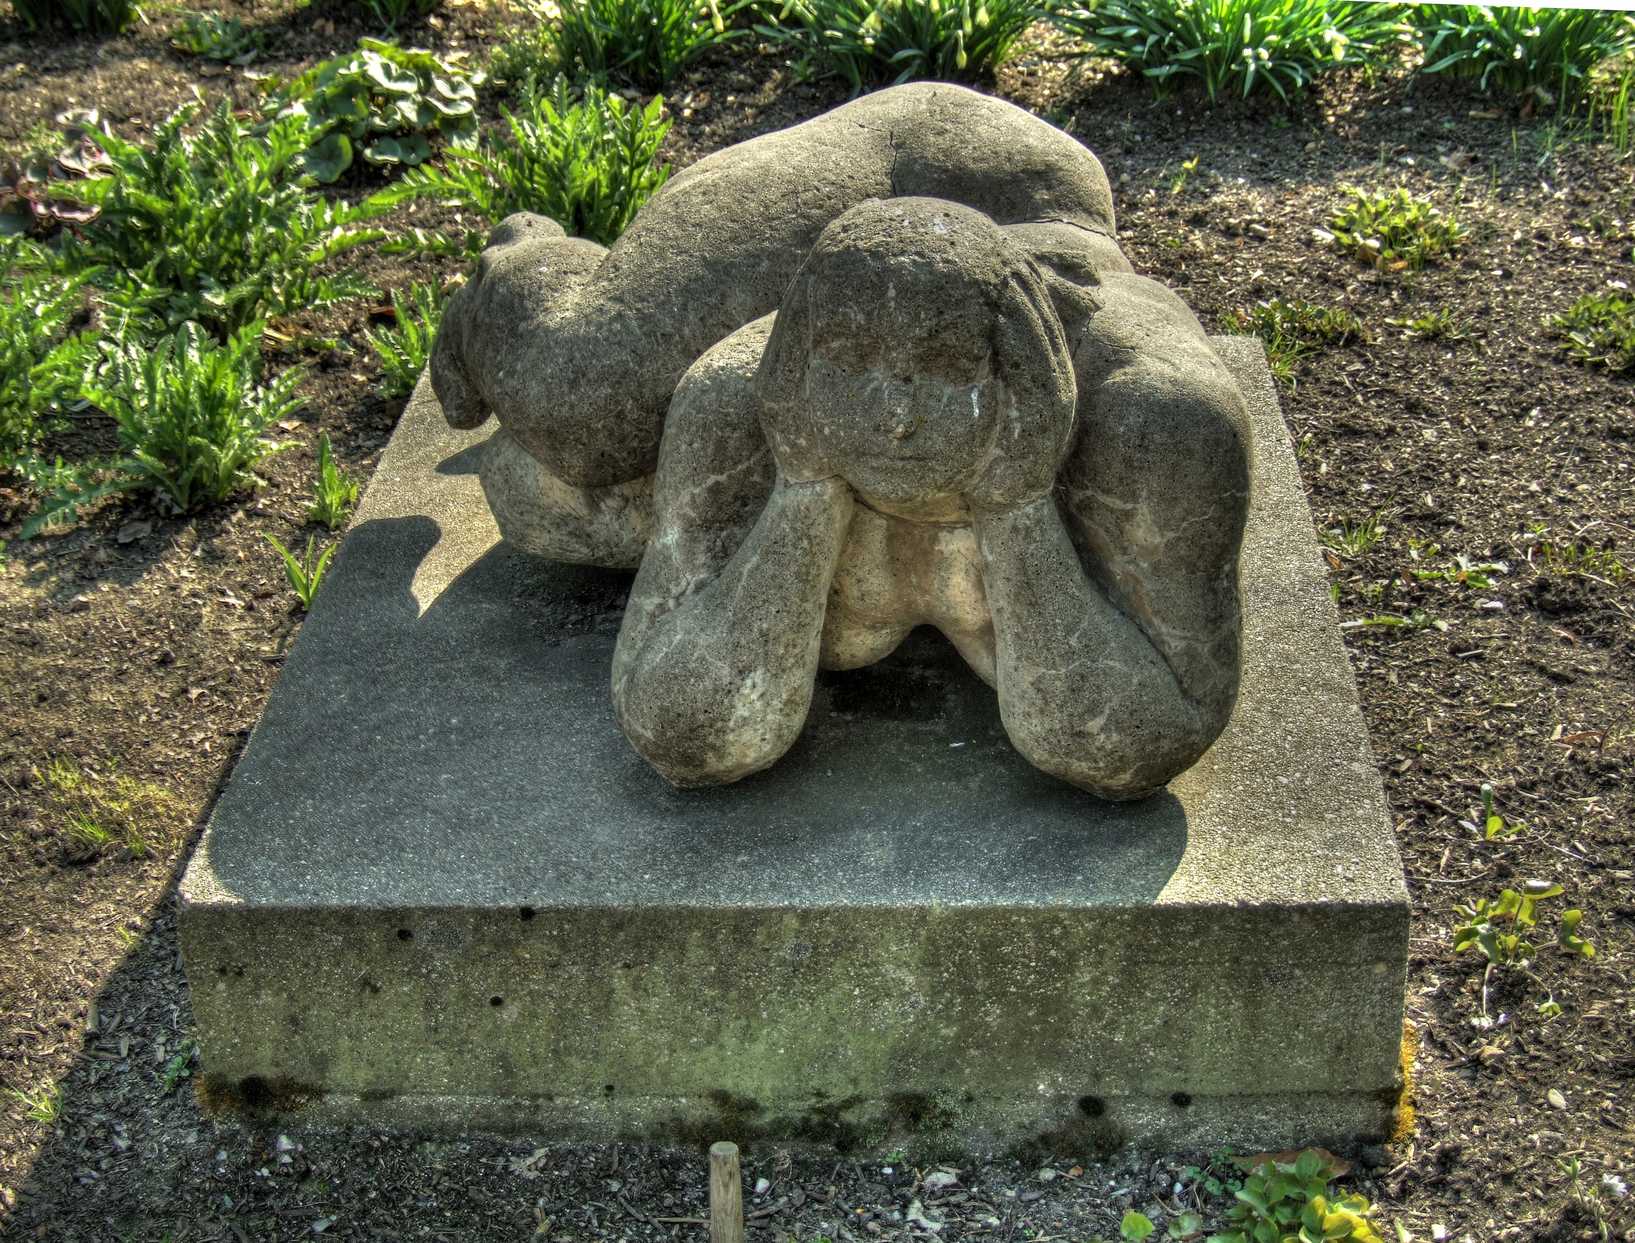 there is an elephant statue on the ground